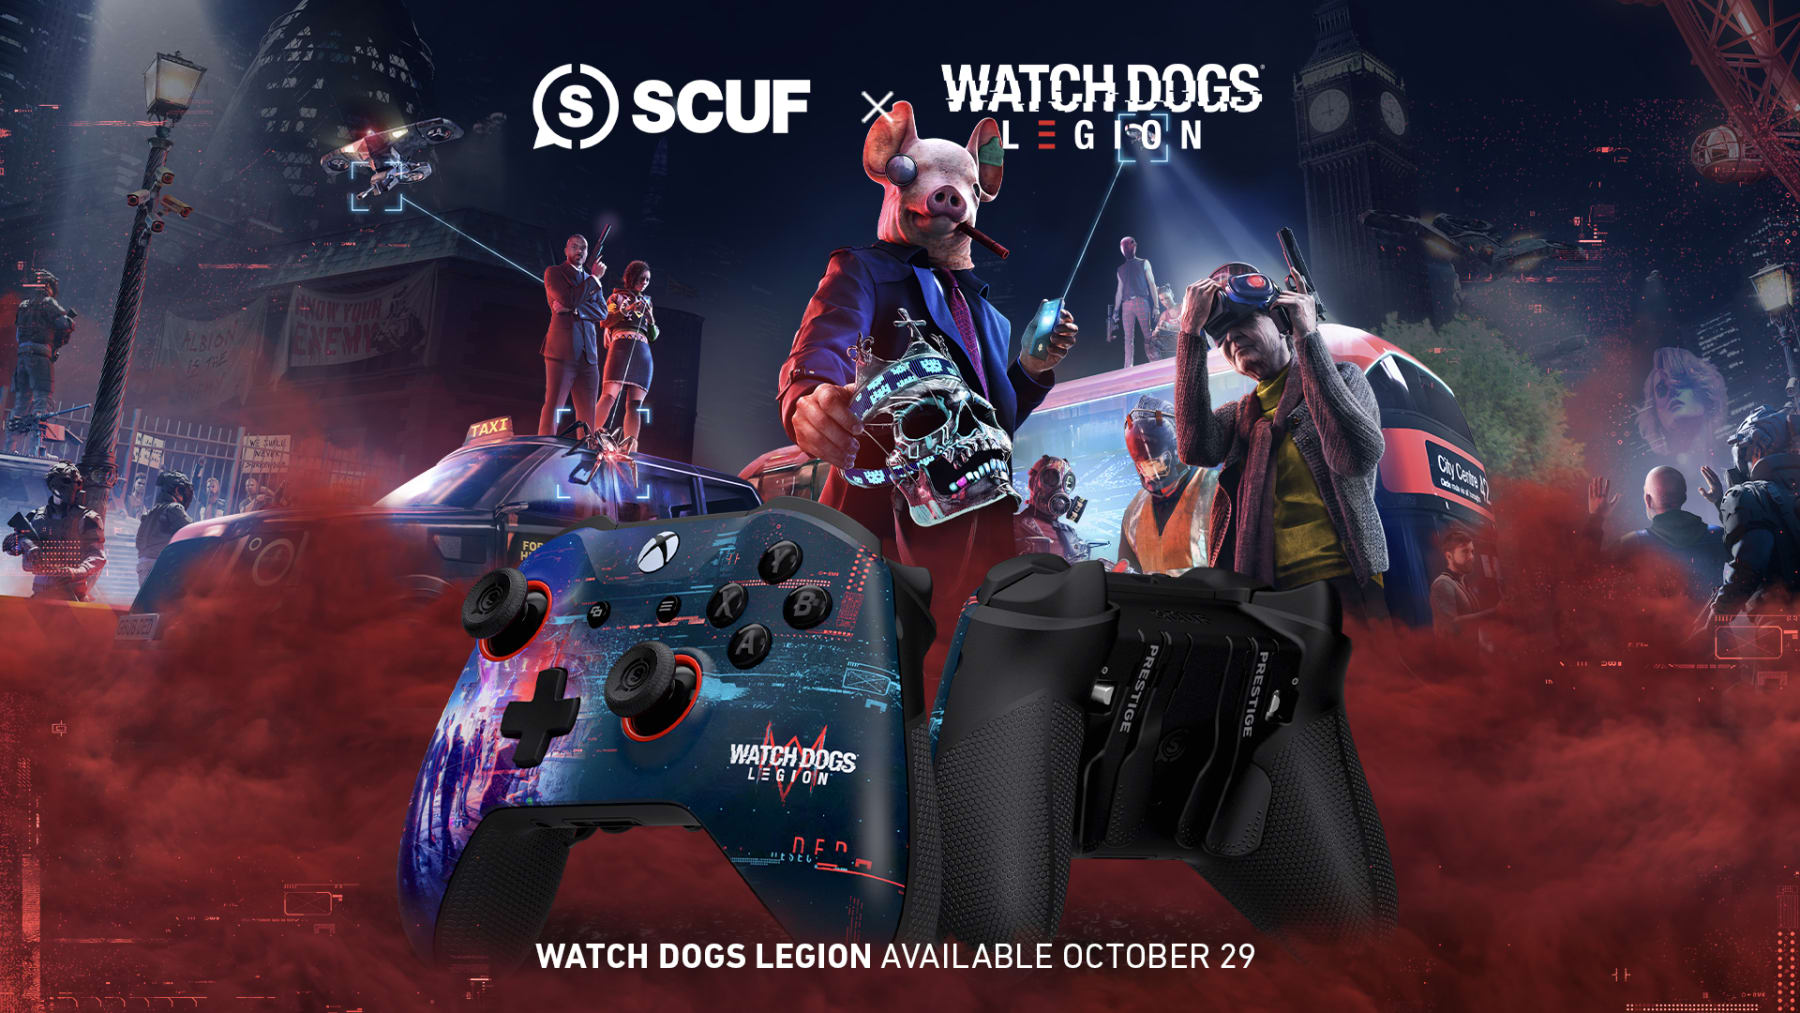 Up to 60% off Watch Dogs Legion for our Travel Sale!